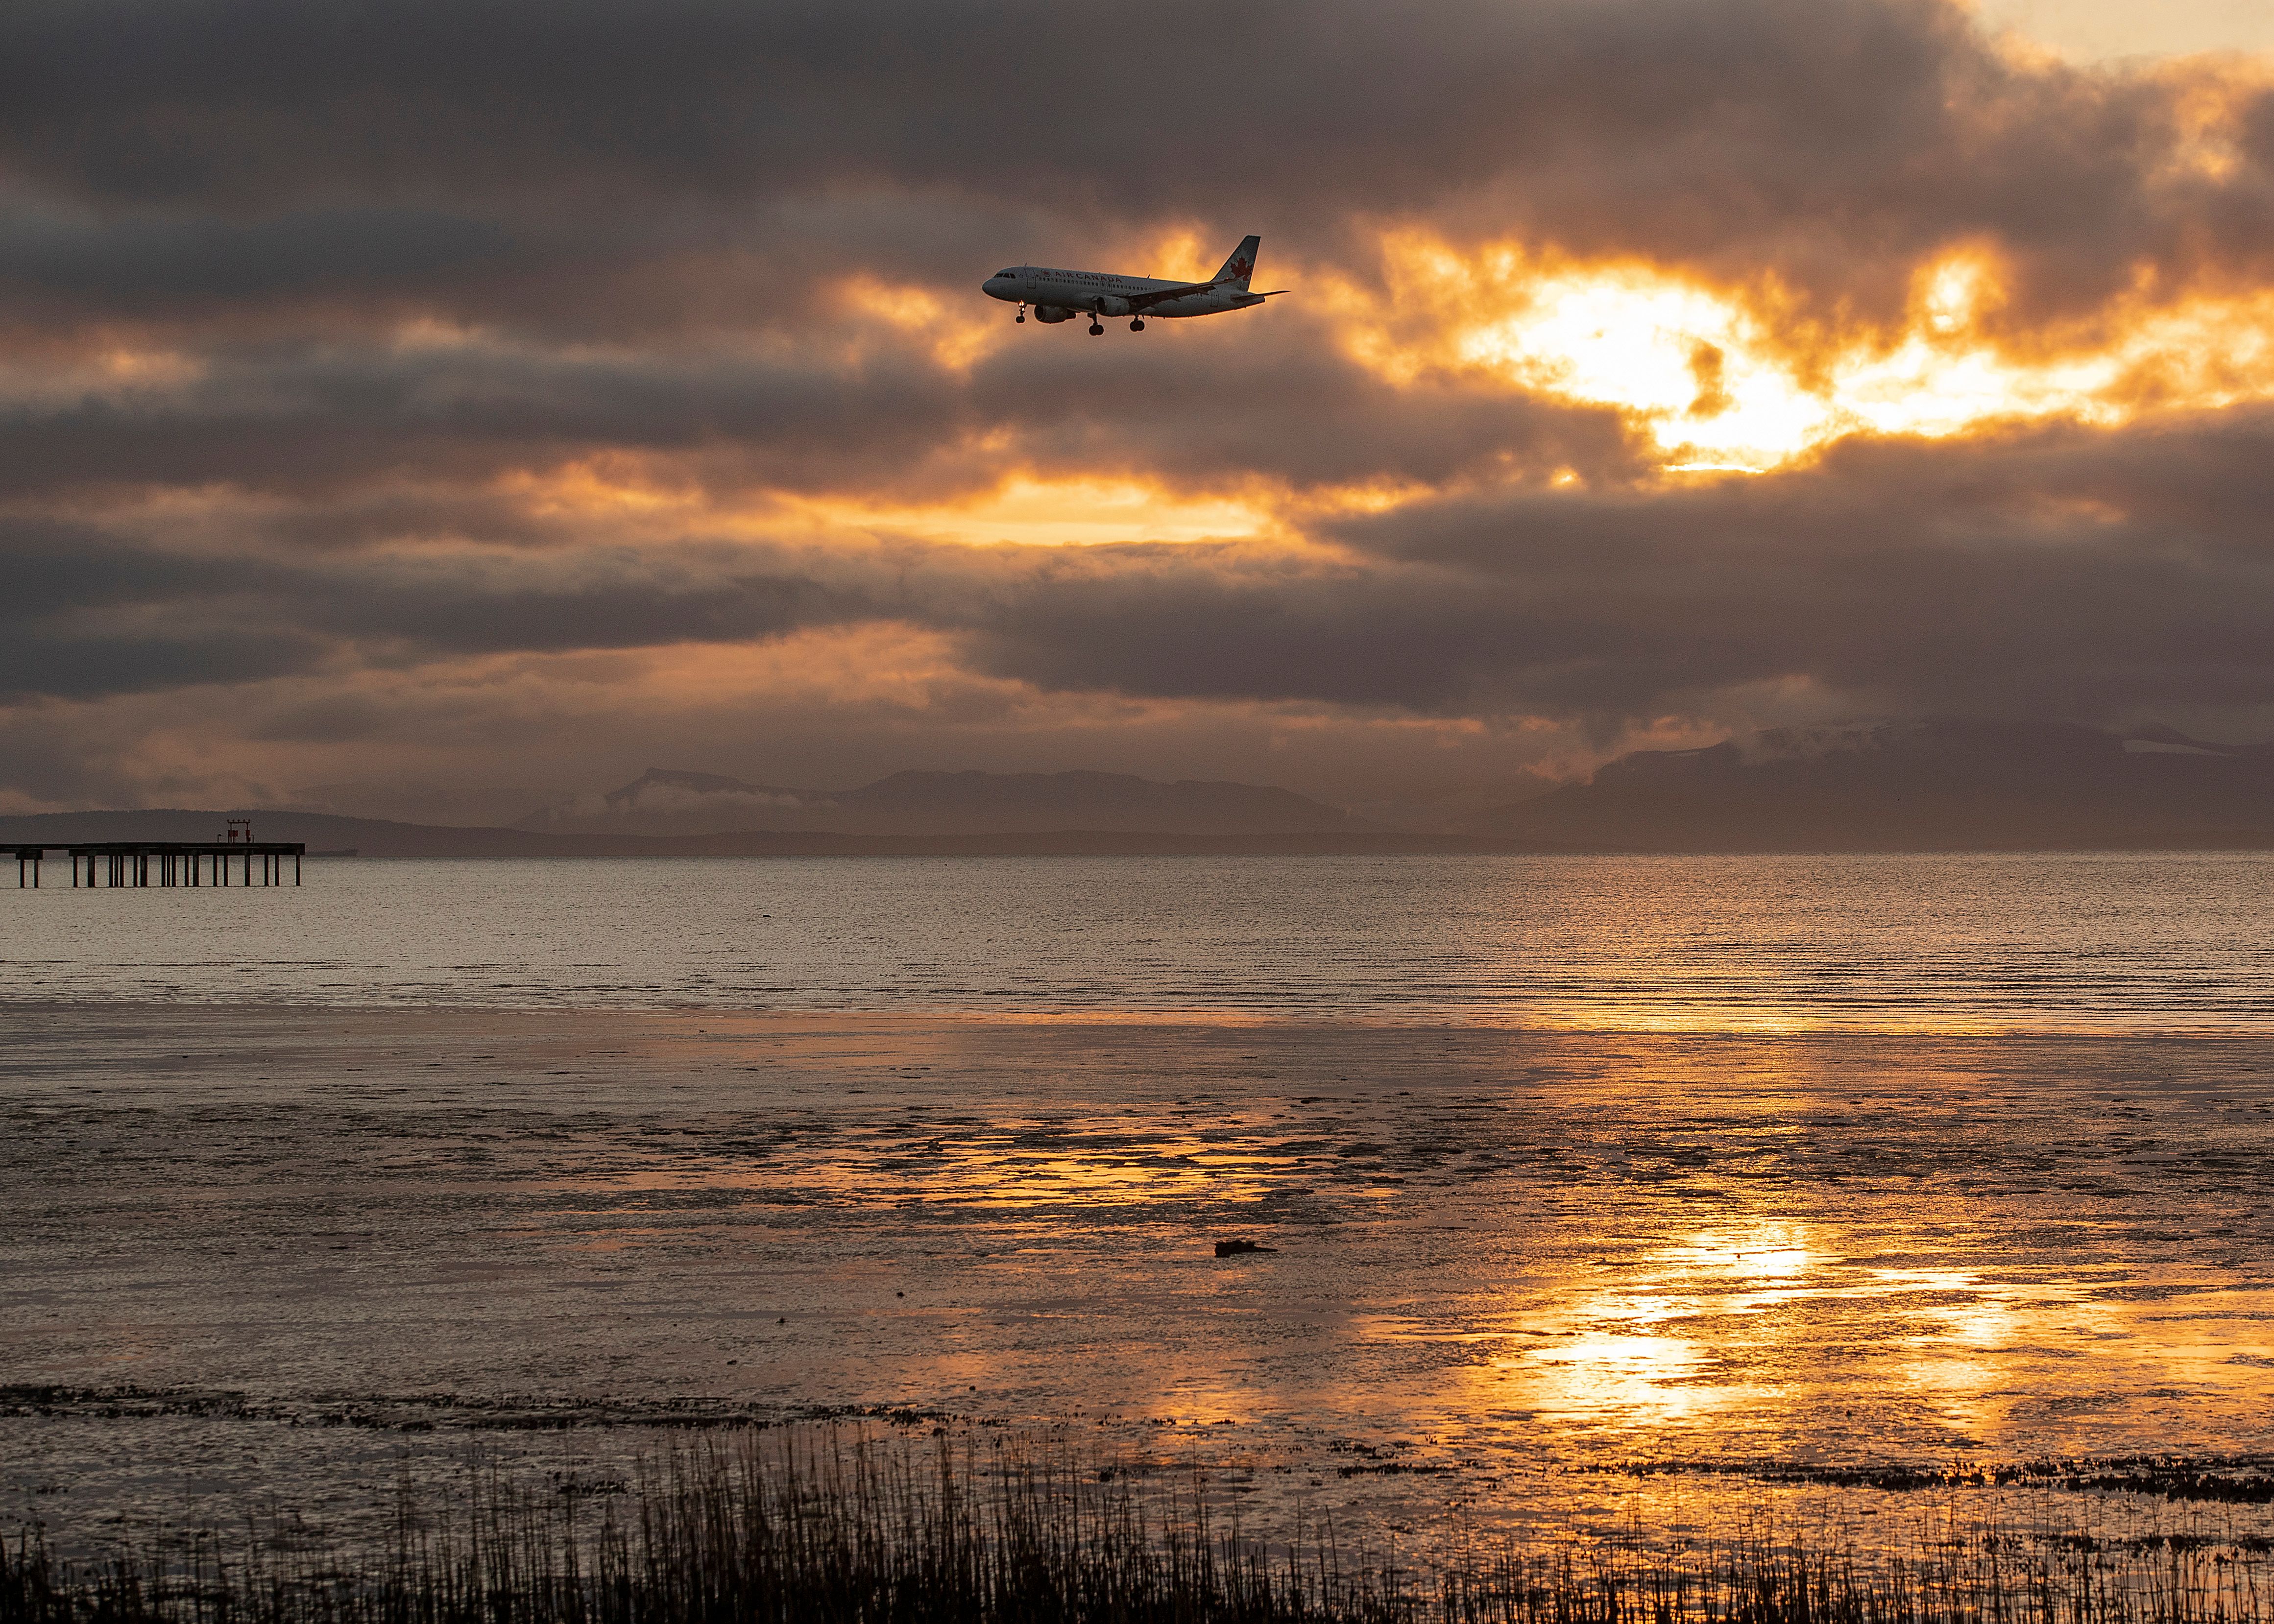 Air Canada plane coming in for landing over landscape at sunset